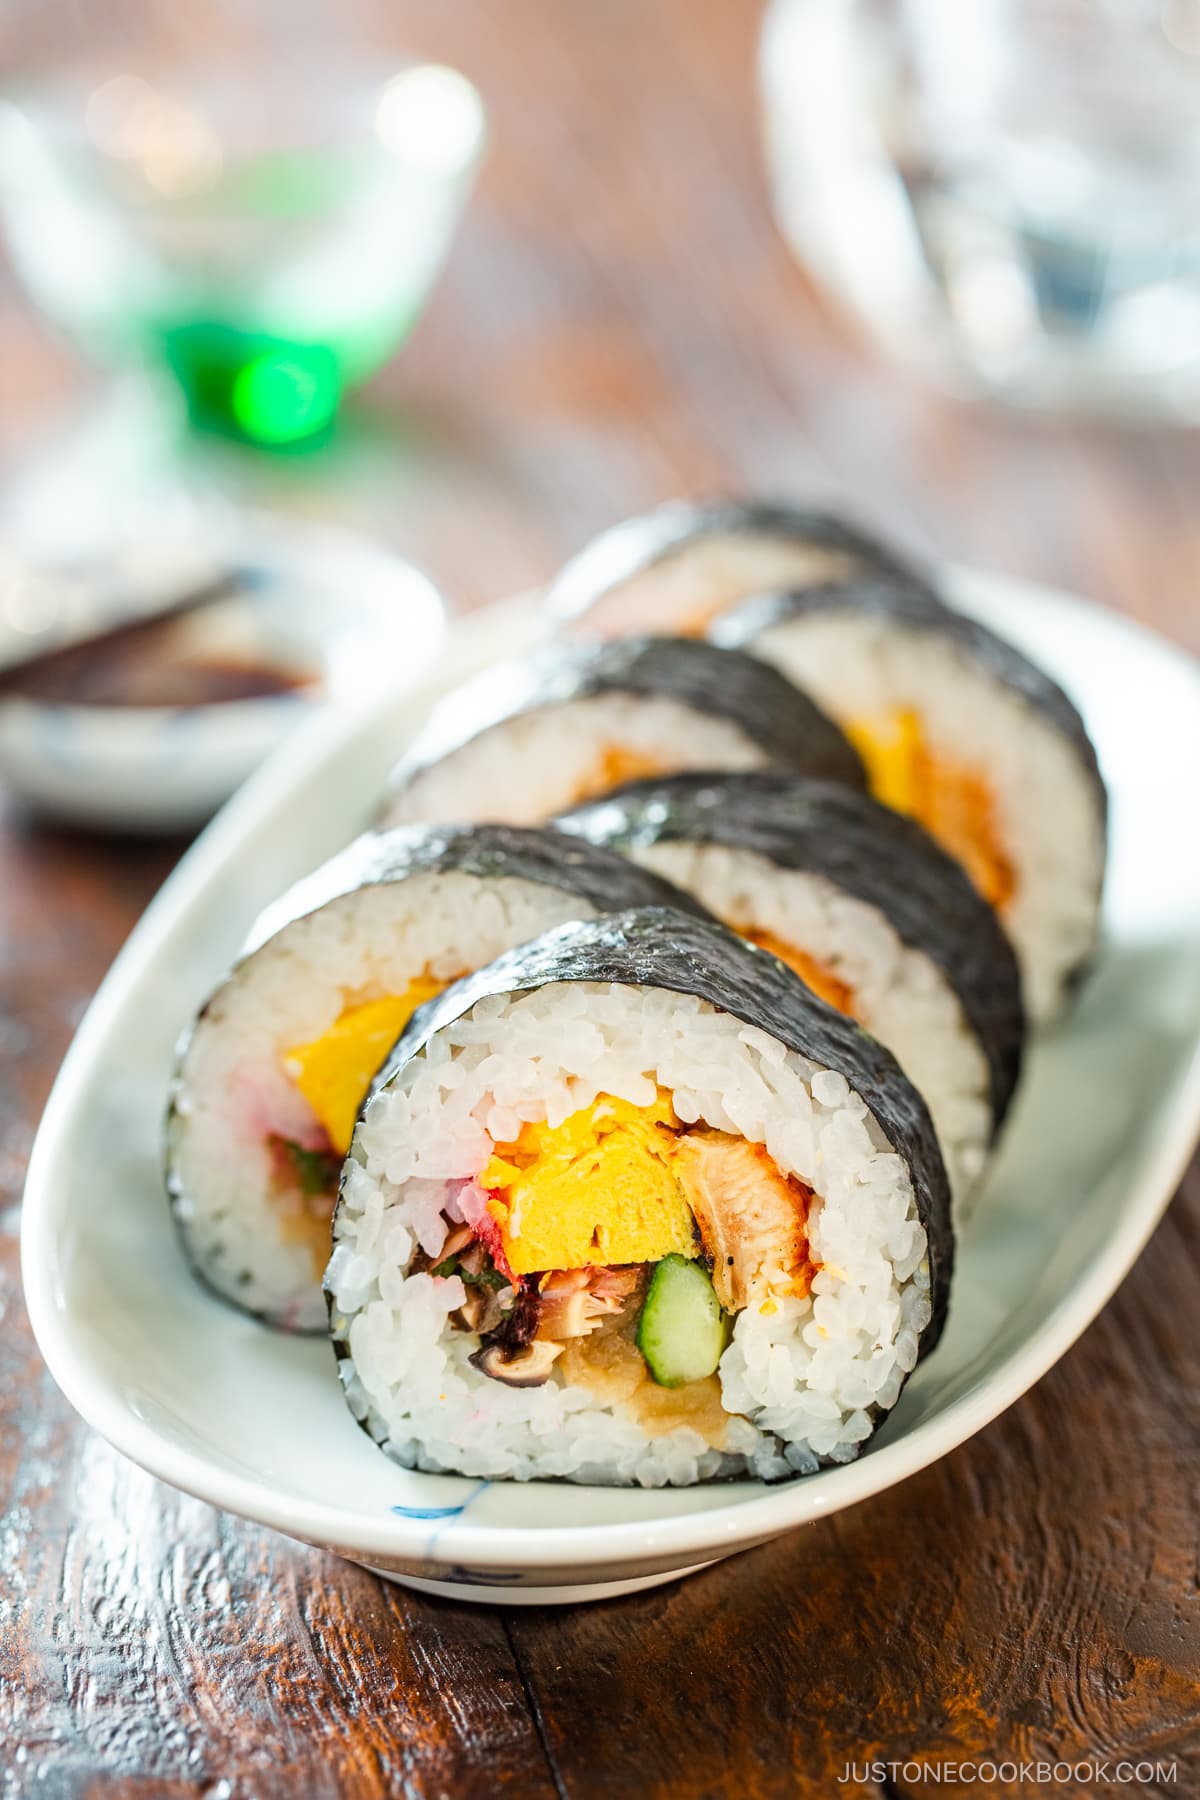 An oval plate containing Futomaki (Thick Maki Sushi).